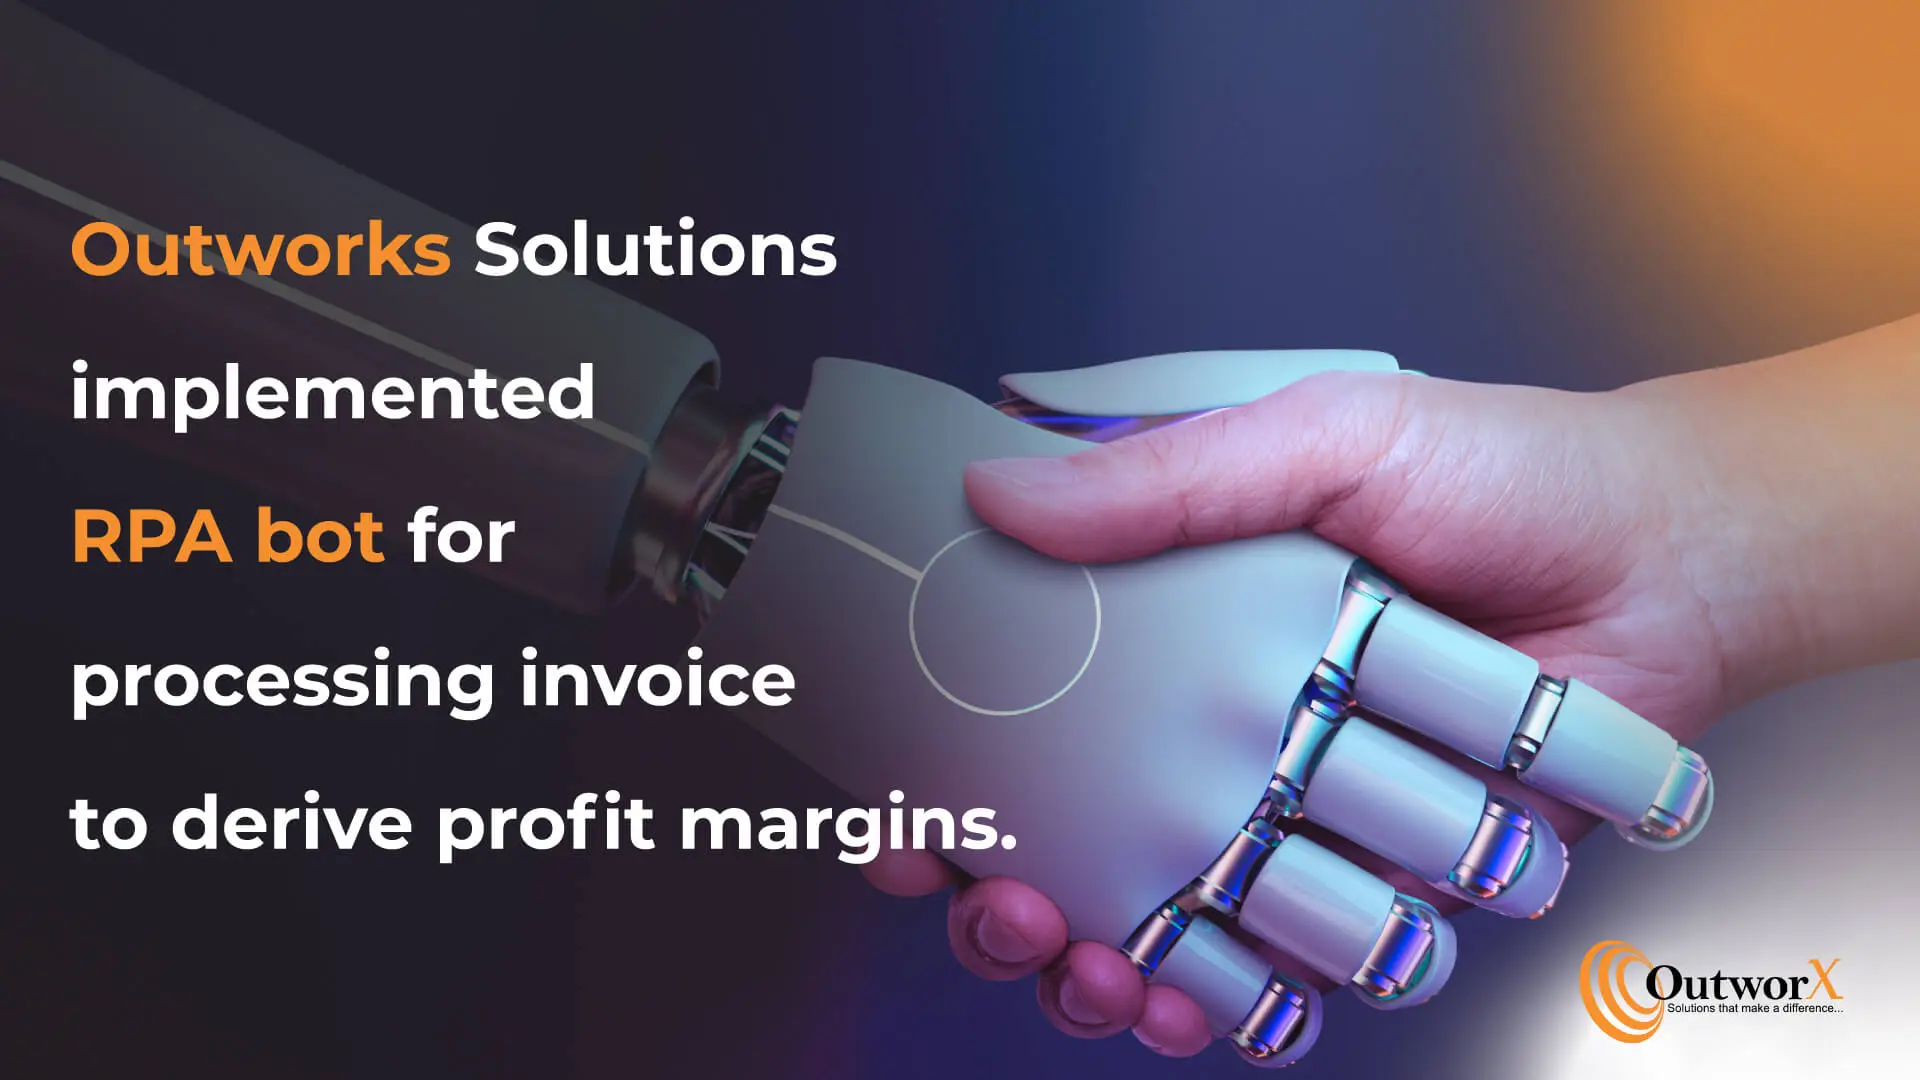 Automate using an RPA bot to help the finance team to process invoice. Contact Outworks for Robotic Process Automation Services.